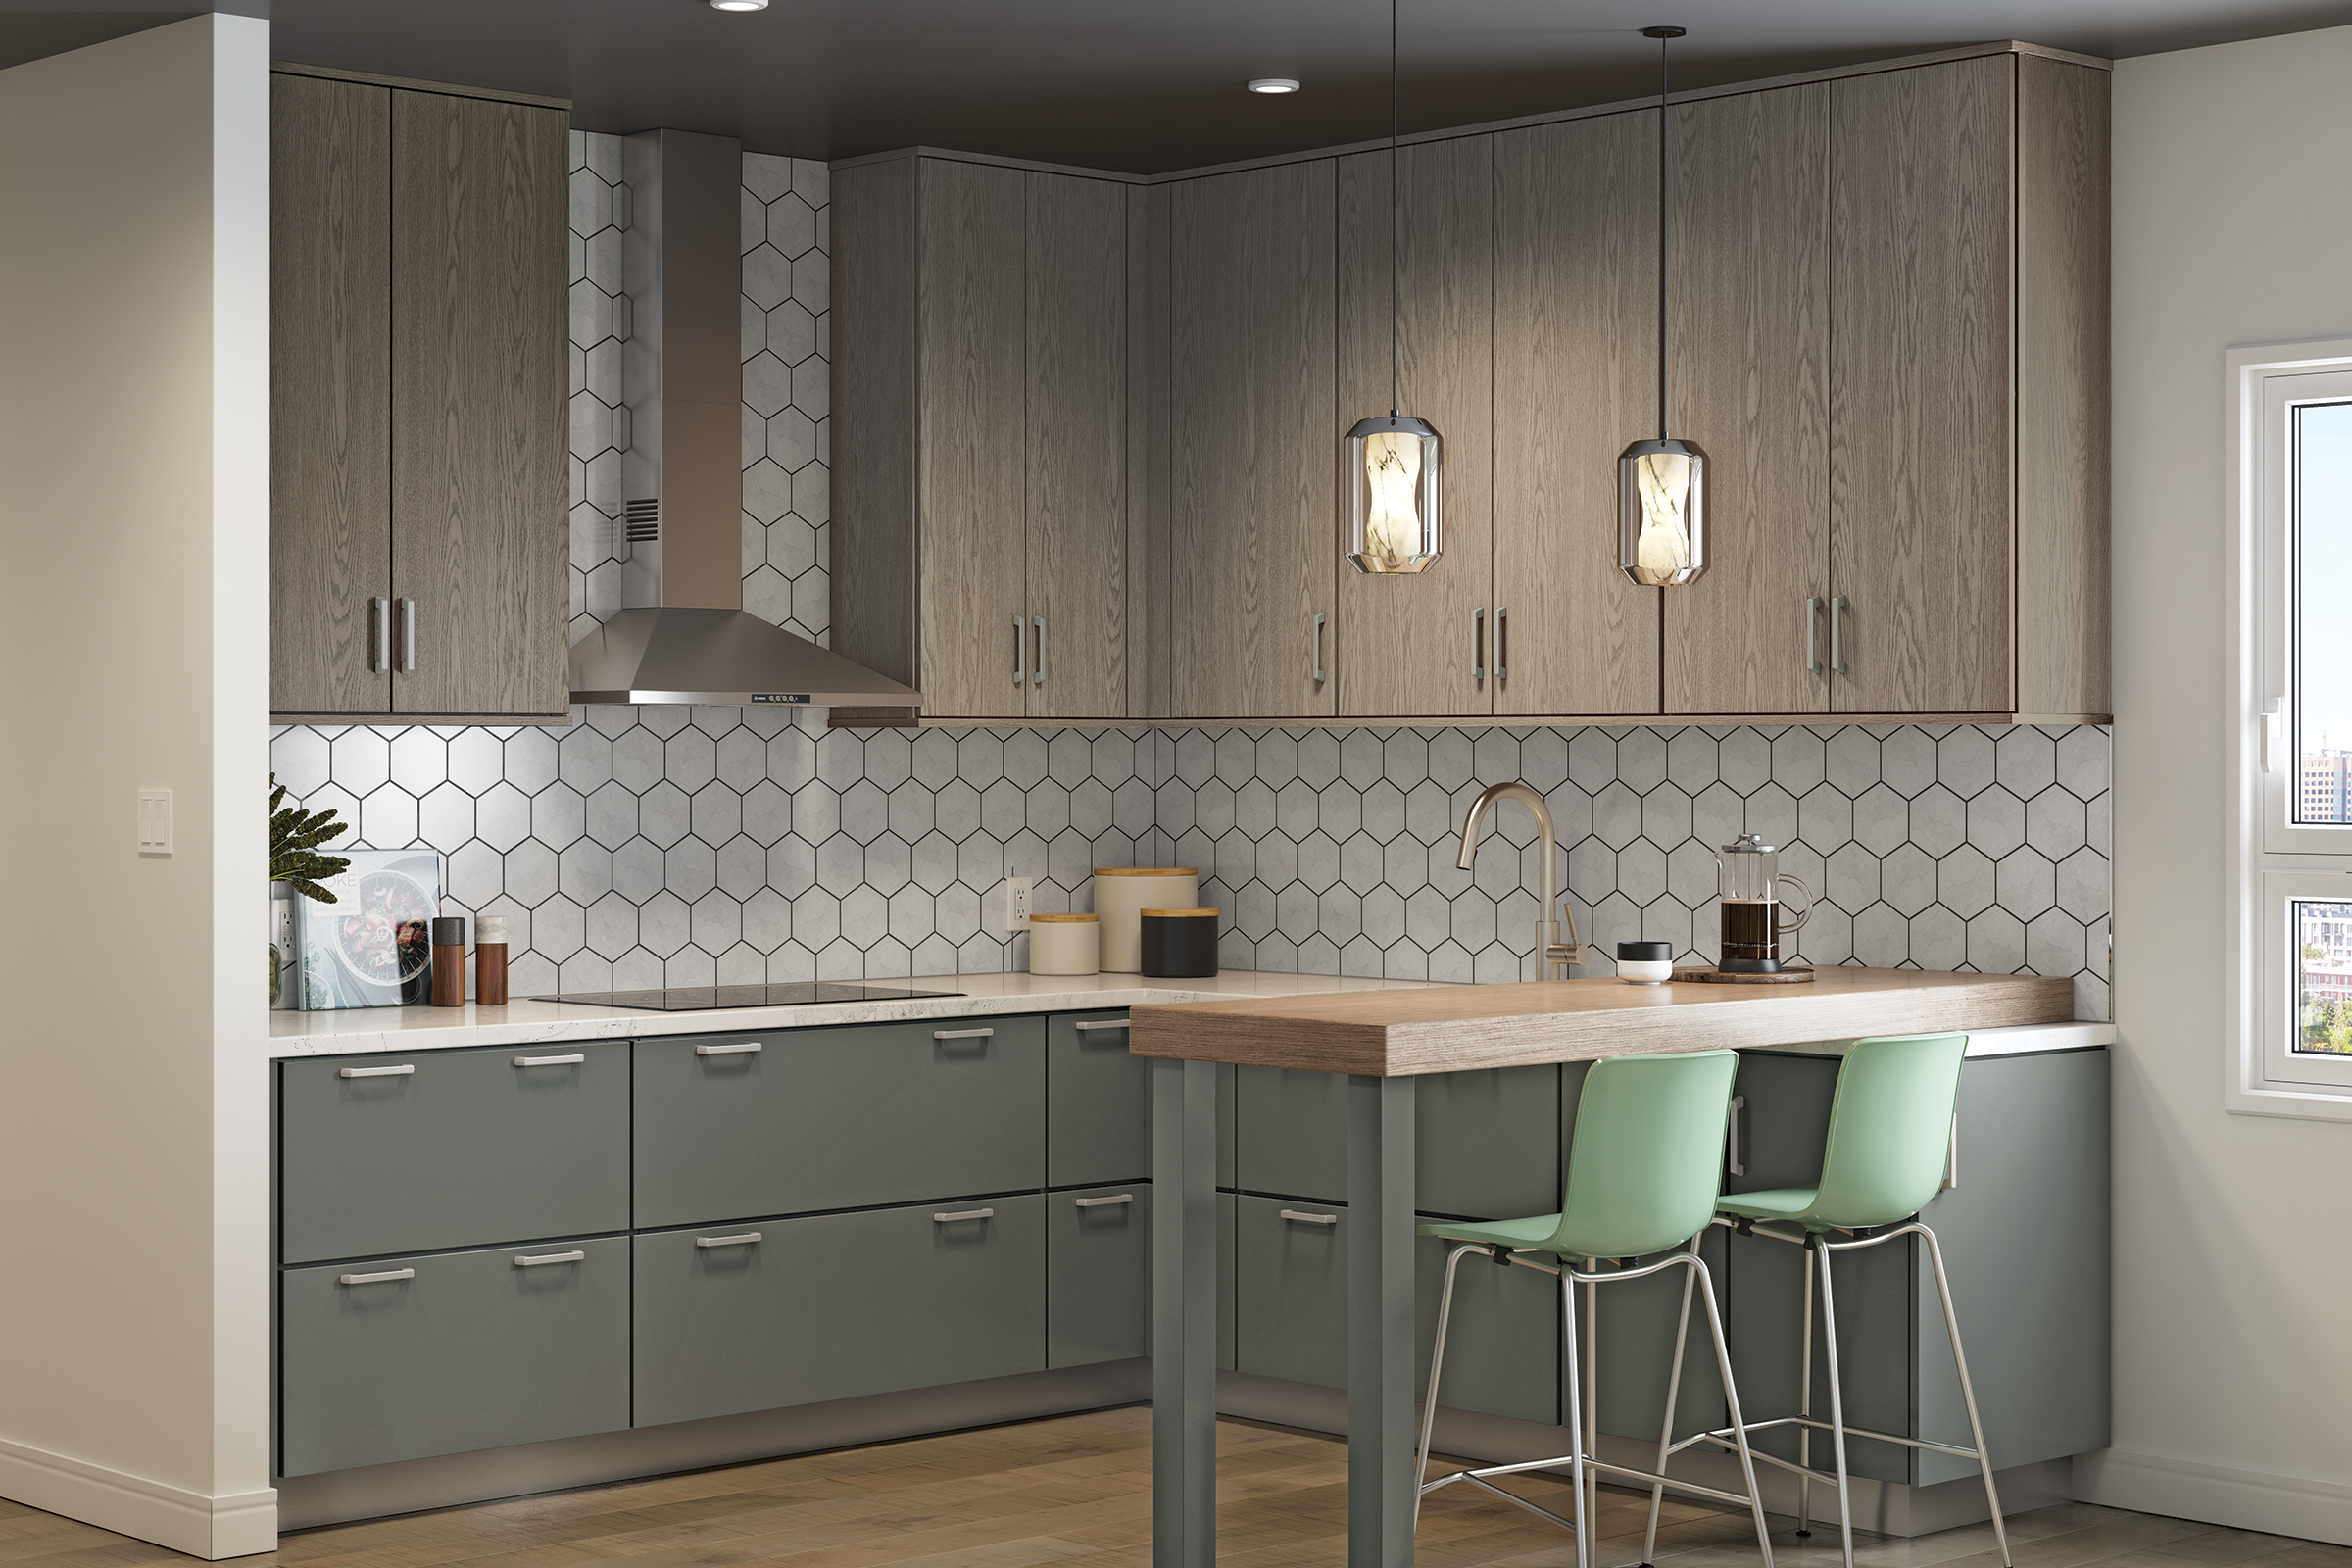 Green kitchen accent stools contrast grey cabinets